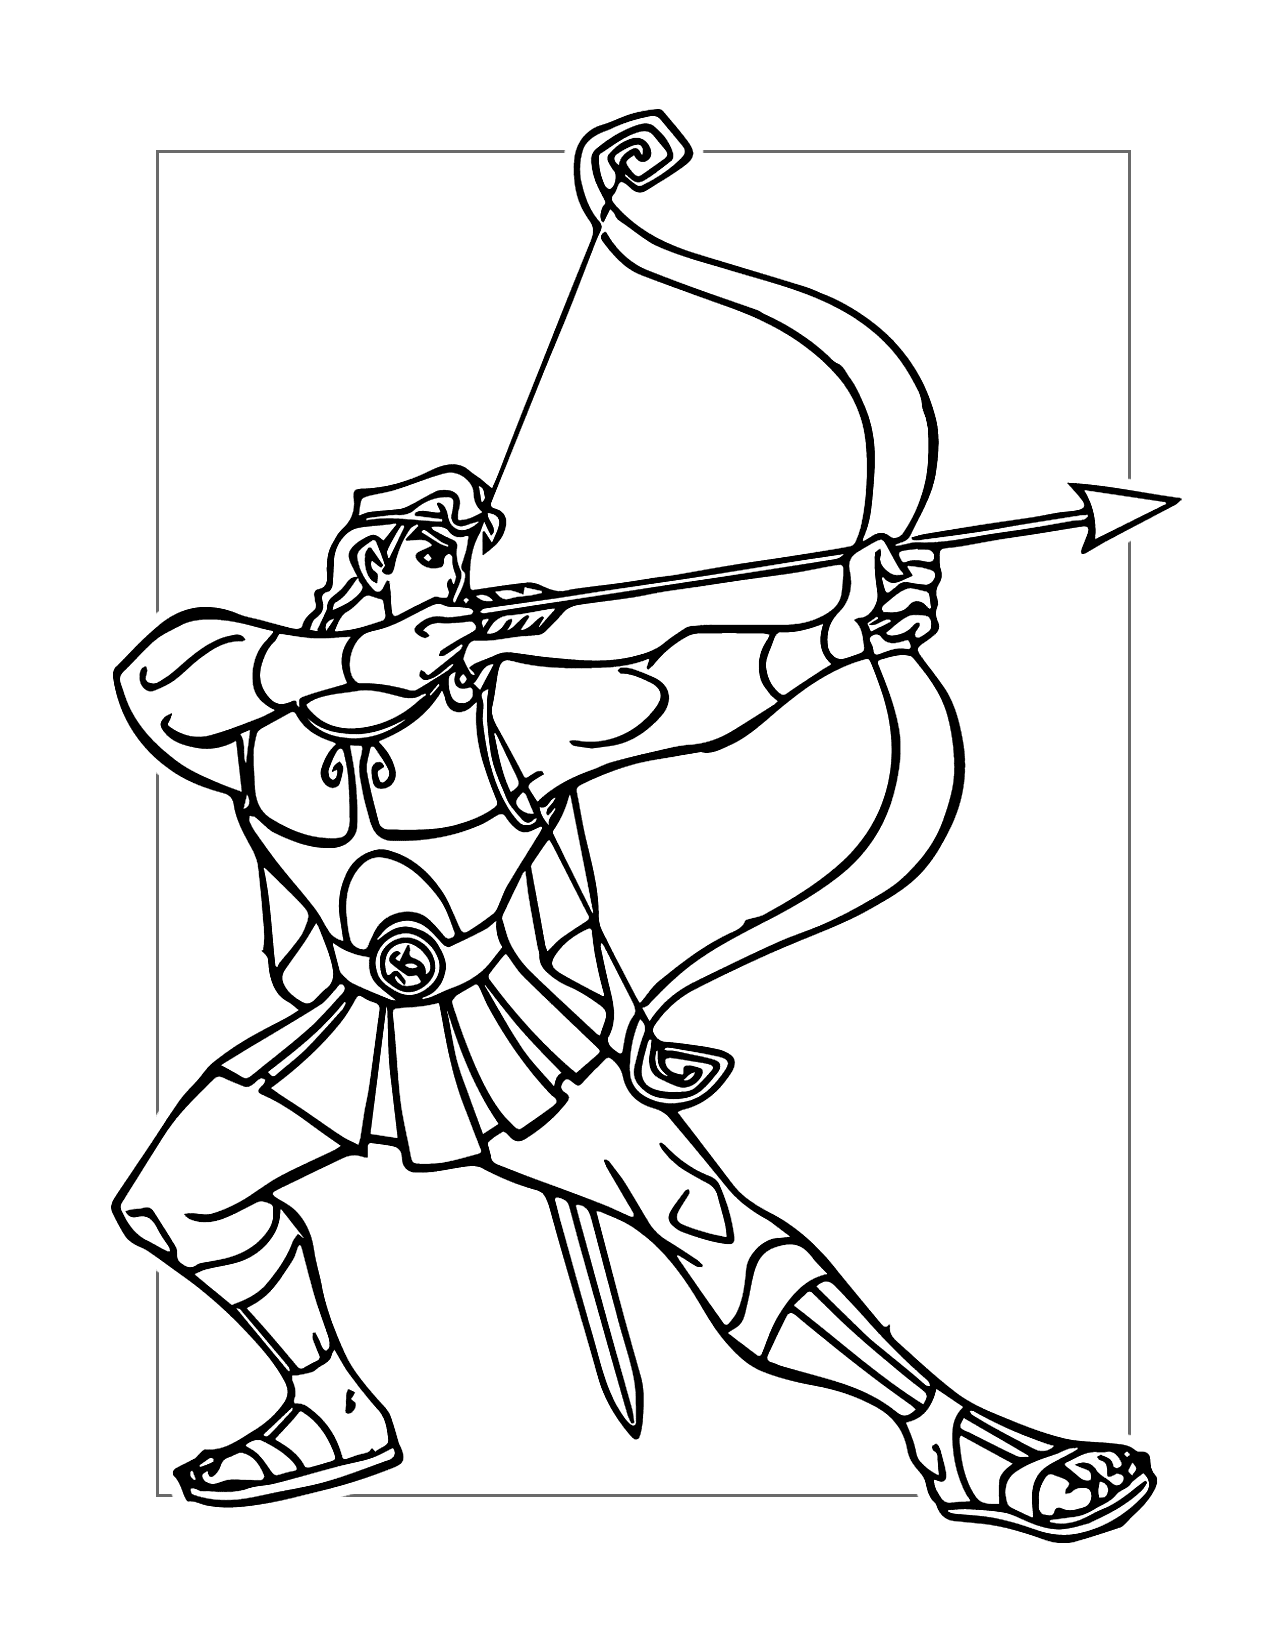 Hercules Shooting An Arrow Coloring Page